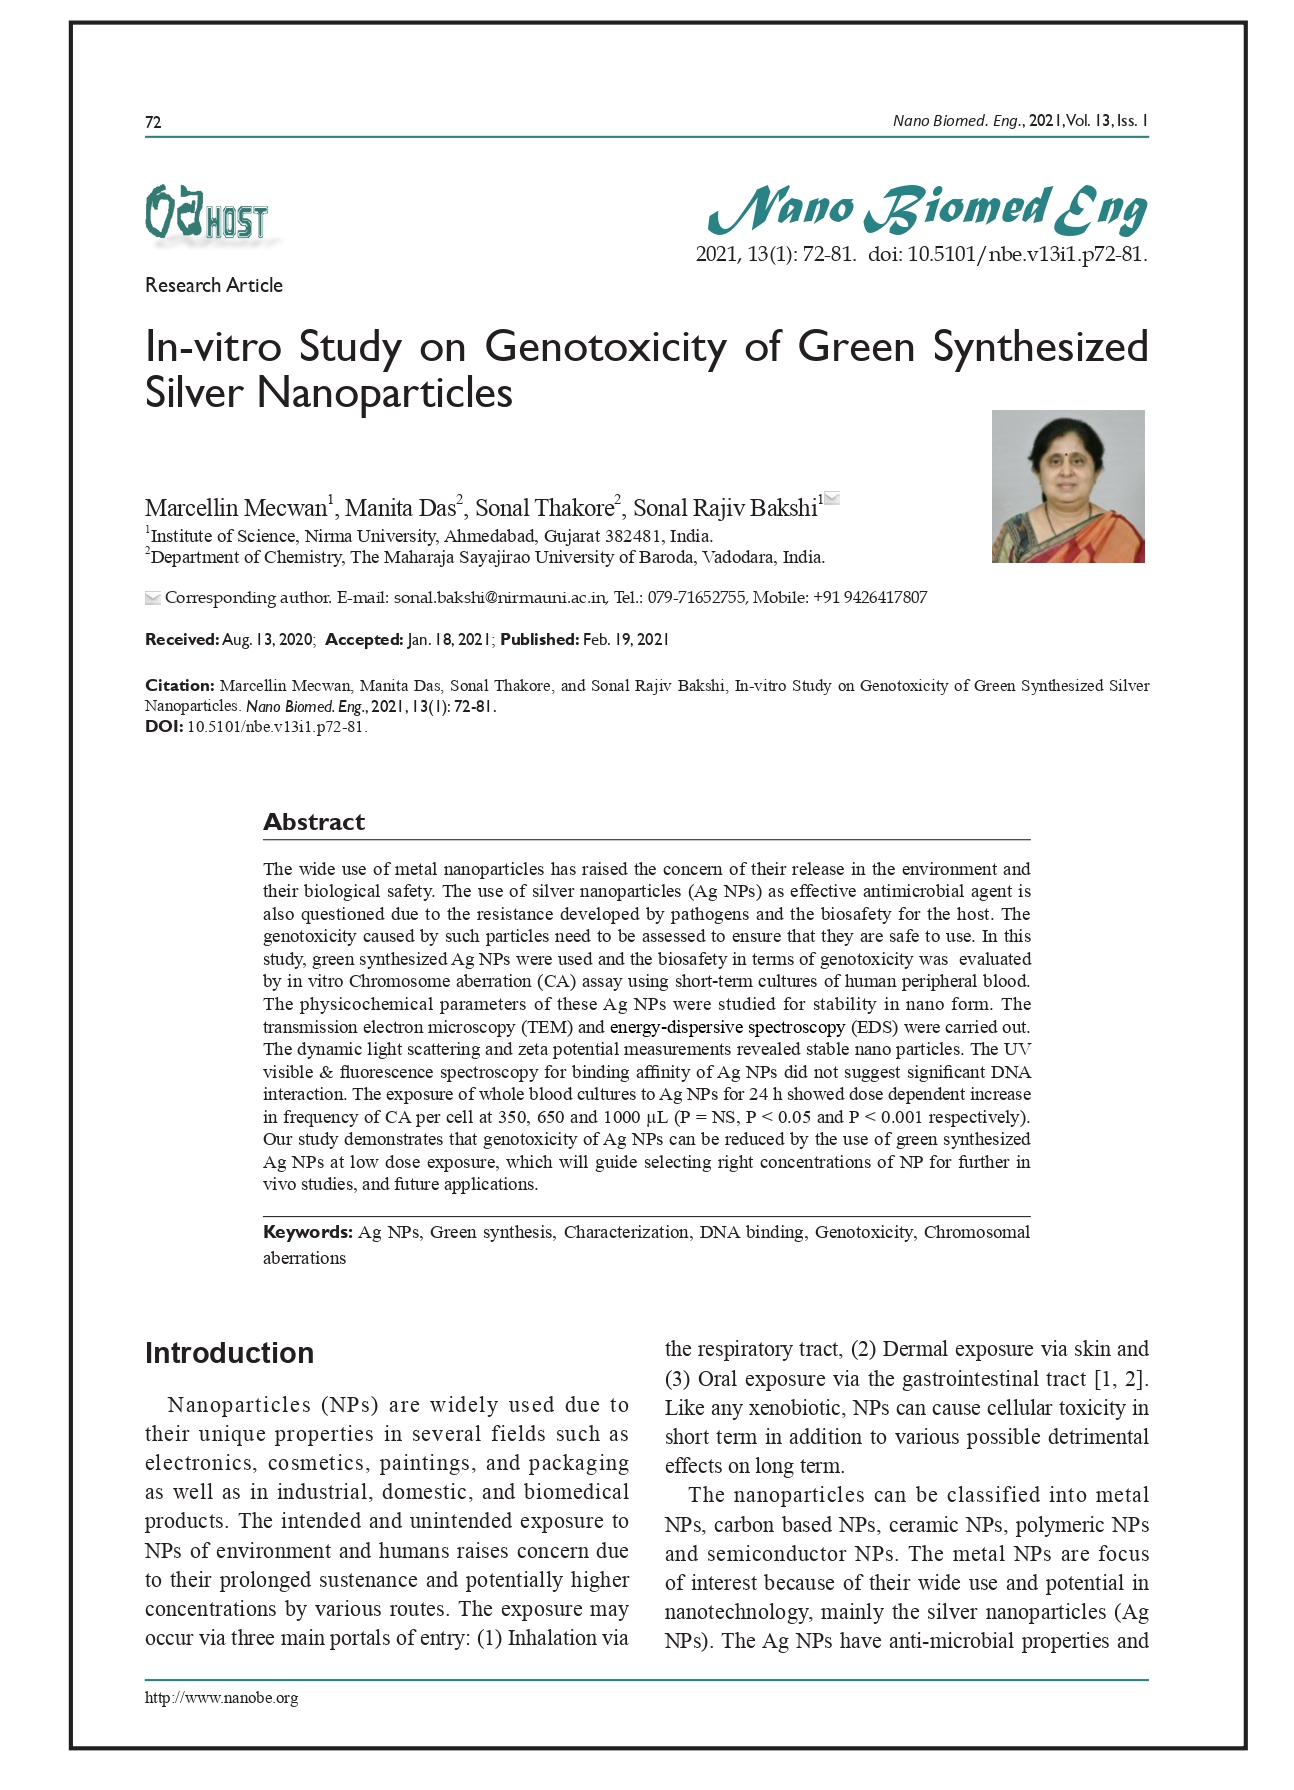 In-vitro Study on Genotoxicity of Green Synthesized Silver Nanoparticles